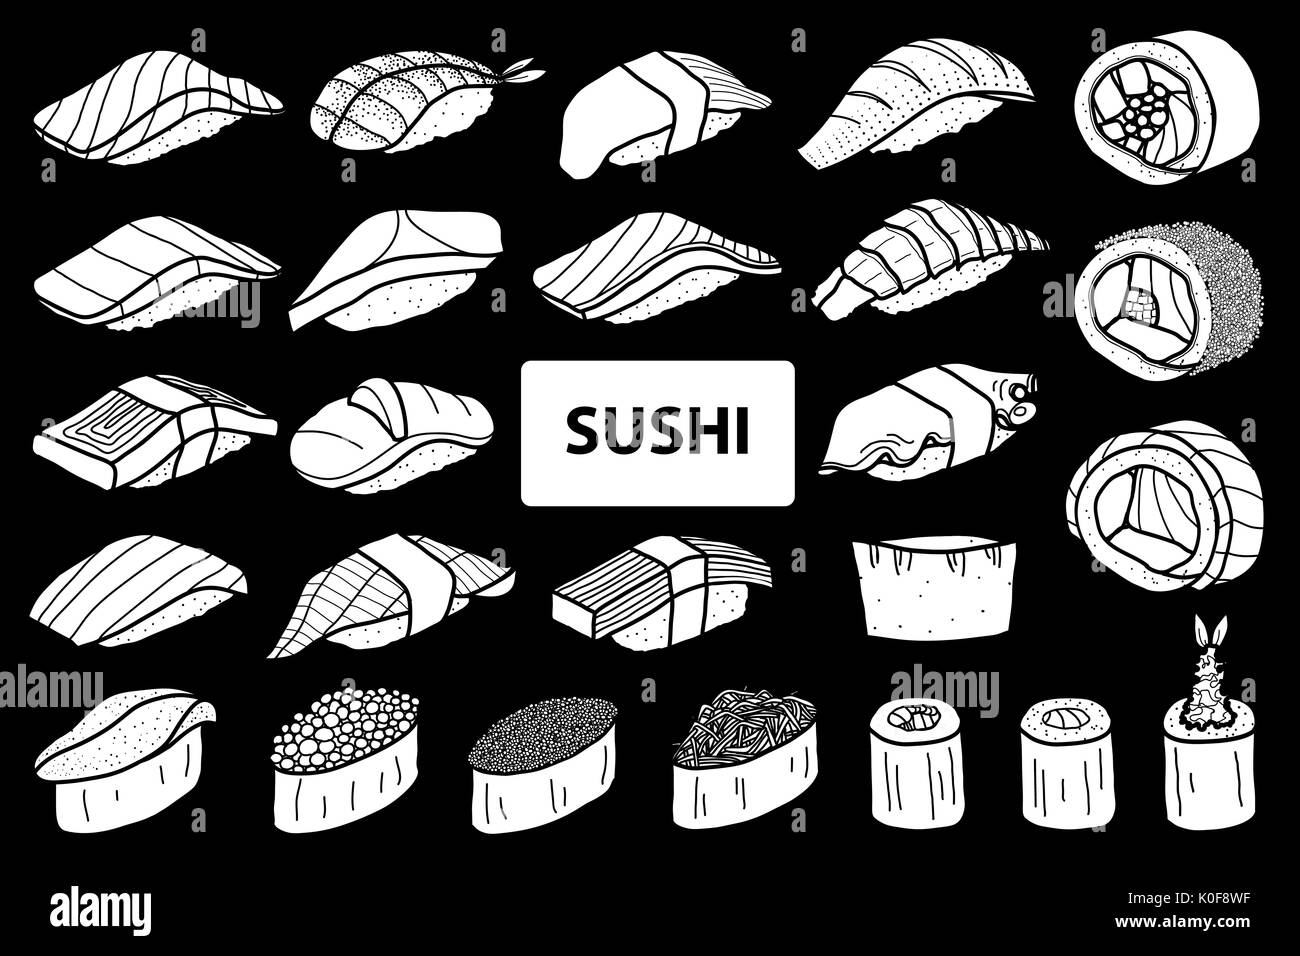 Set of 25 isolated white silhouette sushi and roll. Cute japanese food illustration hand drawn style. Stock Vector